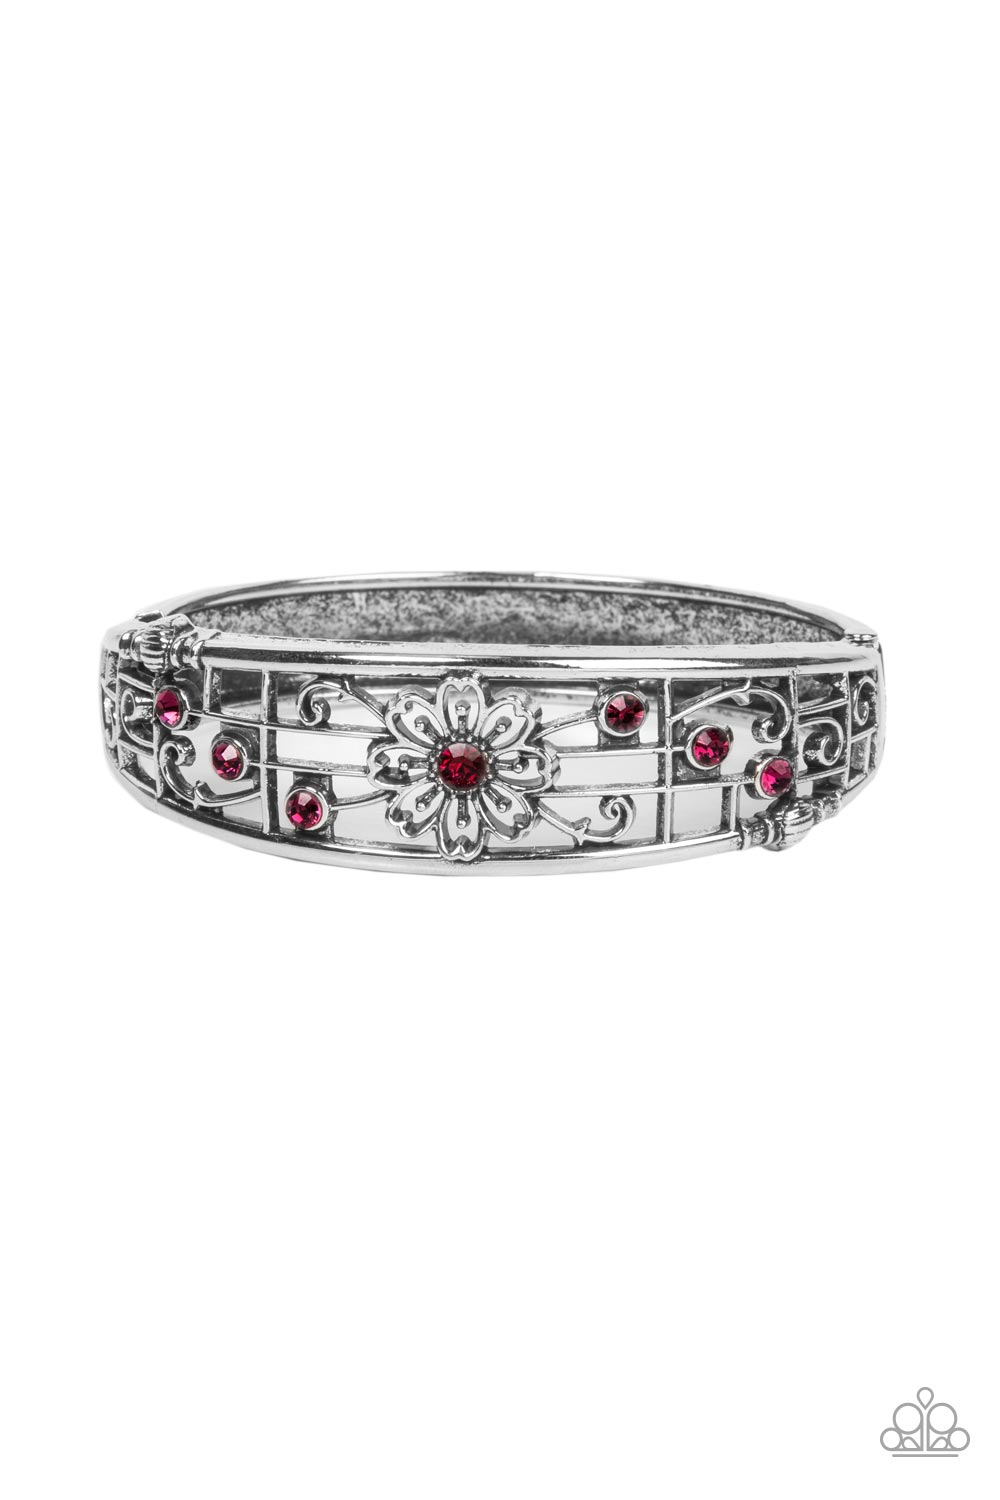 Prairie Musical - Pink Floral - Silver Hinged  Bracelet - Paparazzi Accessories - Slanted trios of dazzling pink rhinestones flank a whimsical white rhinestone dotted floral center, resulting in an airily layered bangle-like bracelet around the wrist. Features a hinged closure. Sold as one individual bracelet.